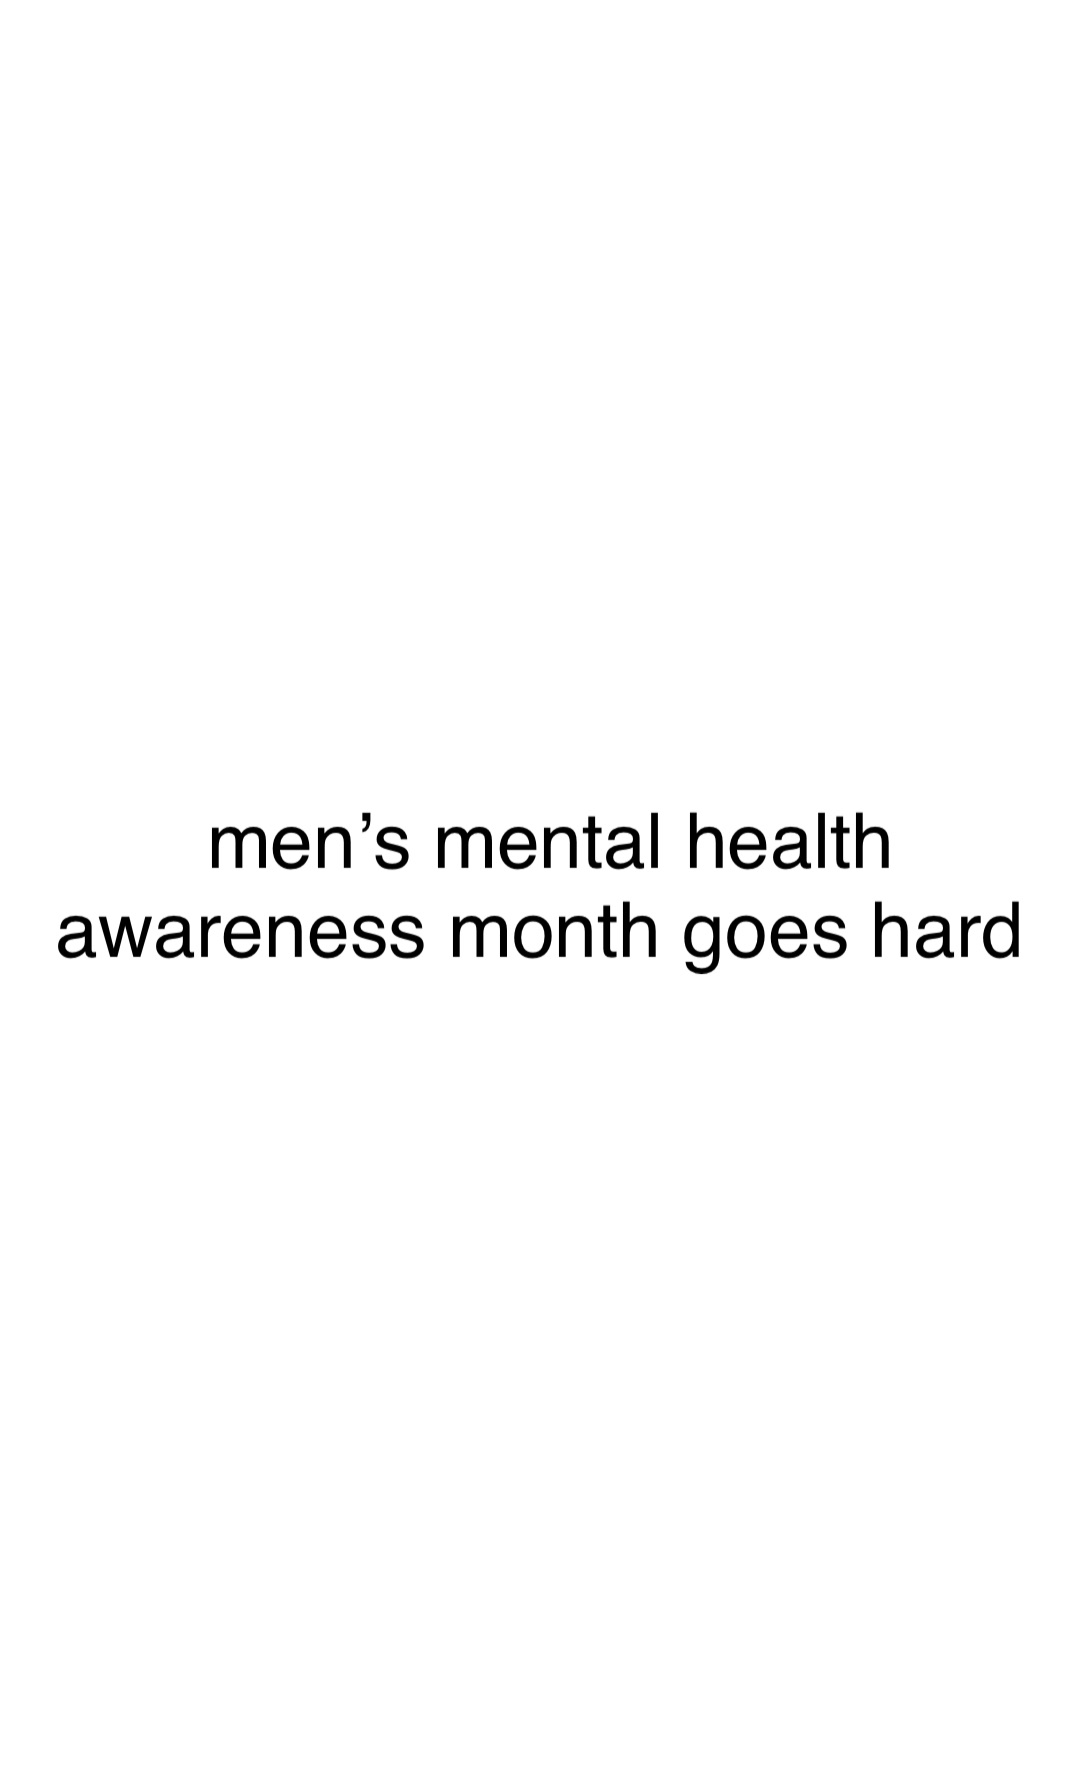 Double tap to edit men’s mental health awareness month goes hard